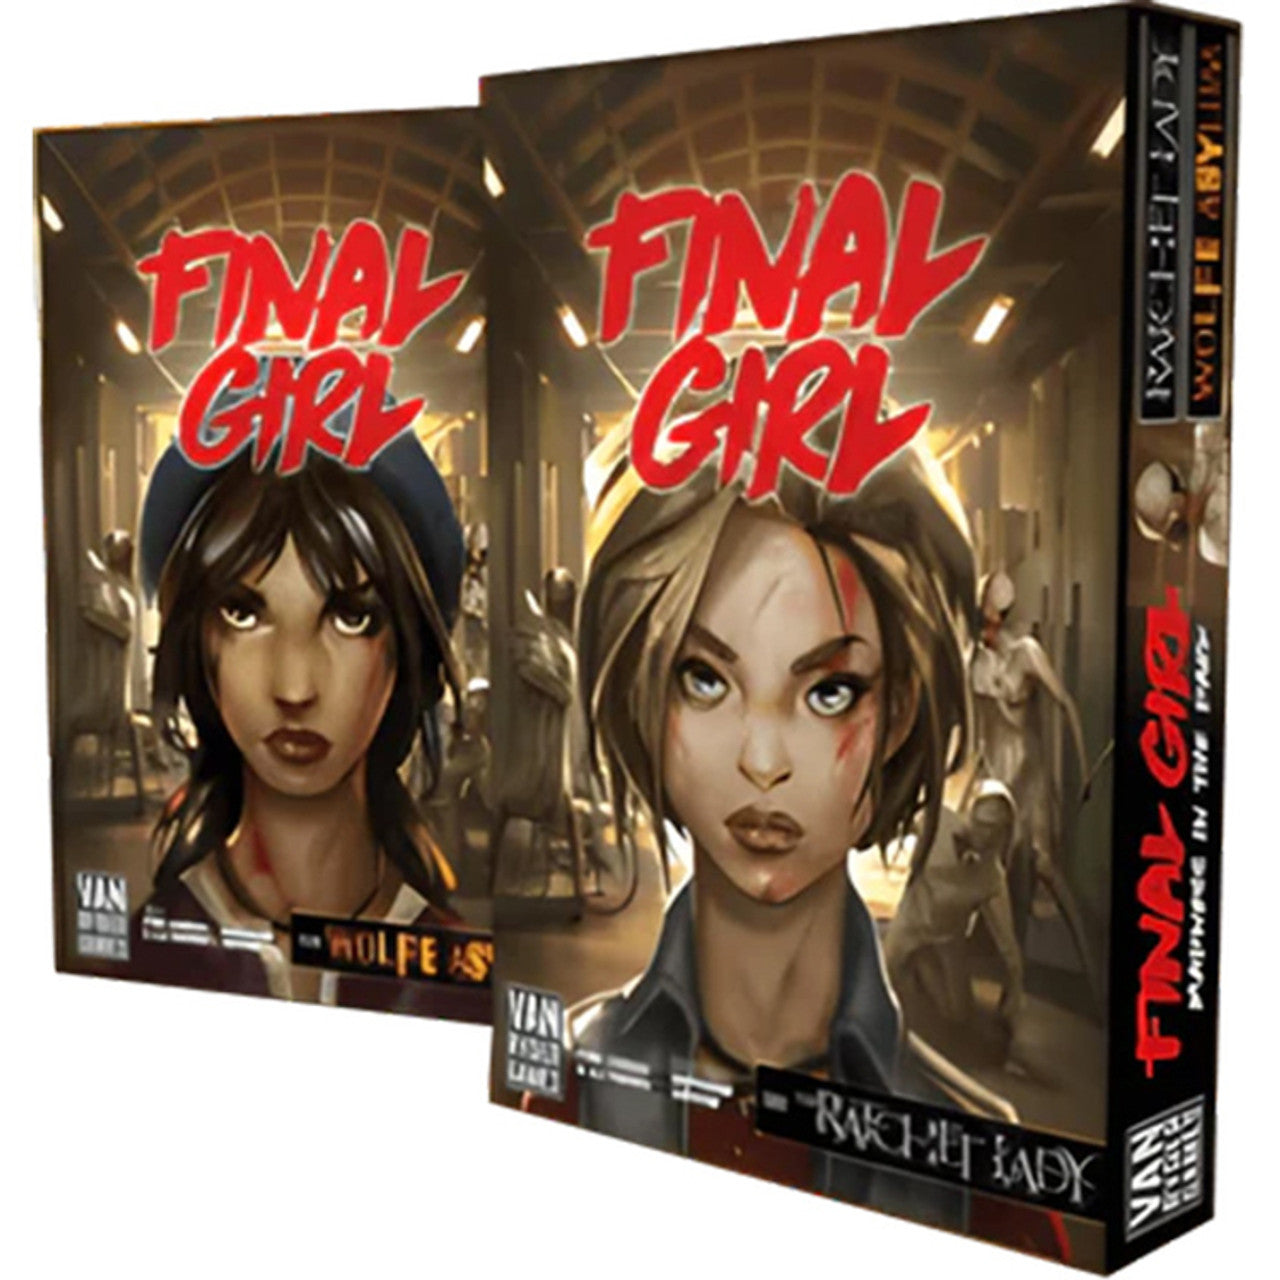 (BSG Certified USED) Final Girl: Series 2 - Madness in the Dark